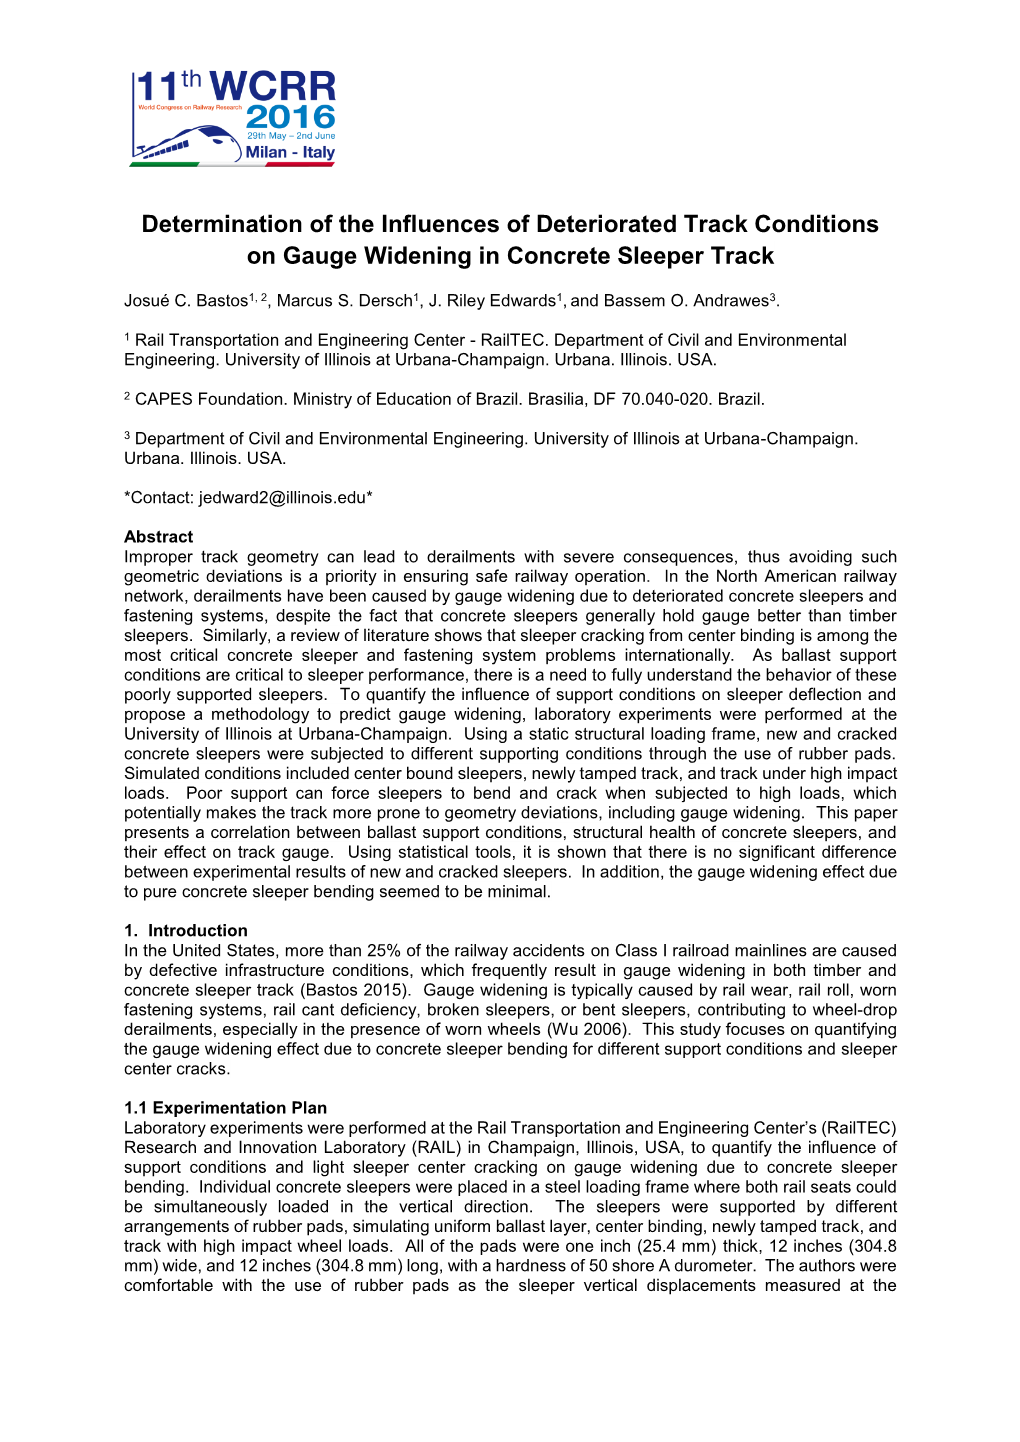 Determination of the Influences of Deteriorated Track Conditions on Gauge Widening in Concrete Sleeper Track